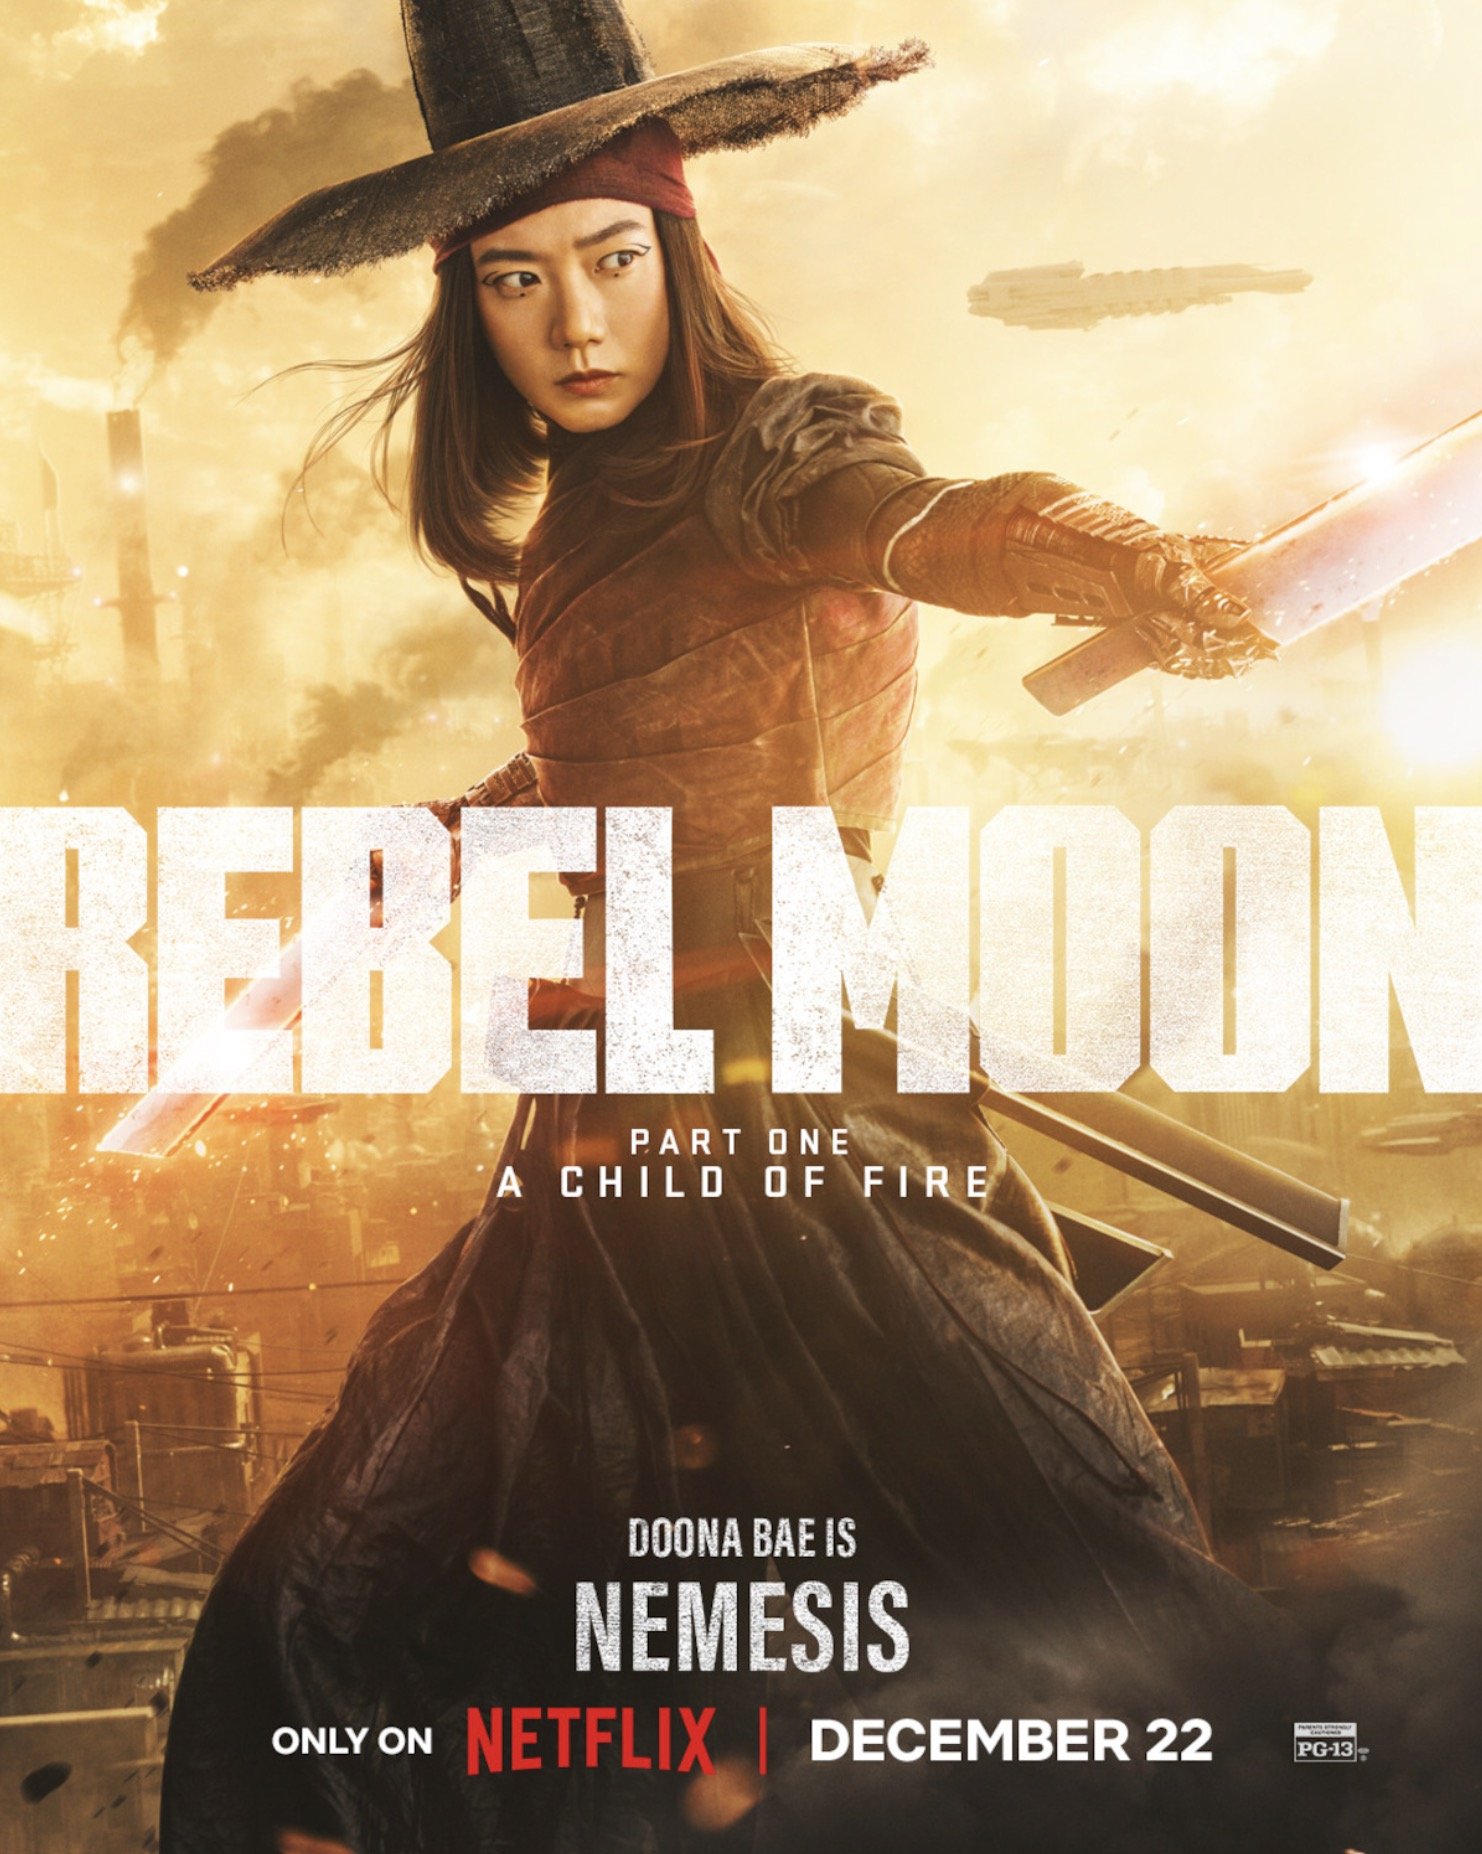 Zack Snyder's Rebel Moon - Part One: A Child of Fire Trailer Reveals  First Installment of his Sci-Fi Saga - The Credits